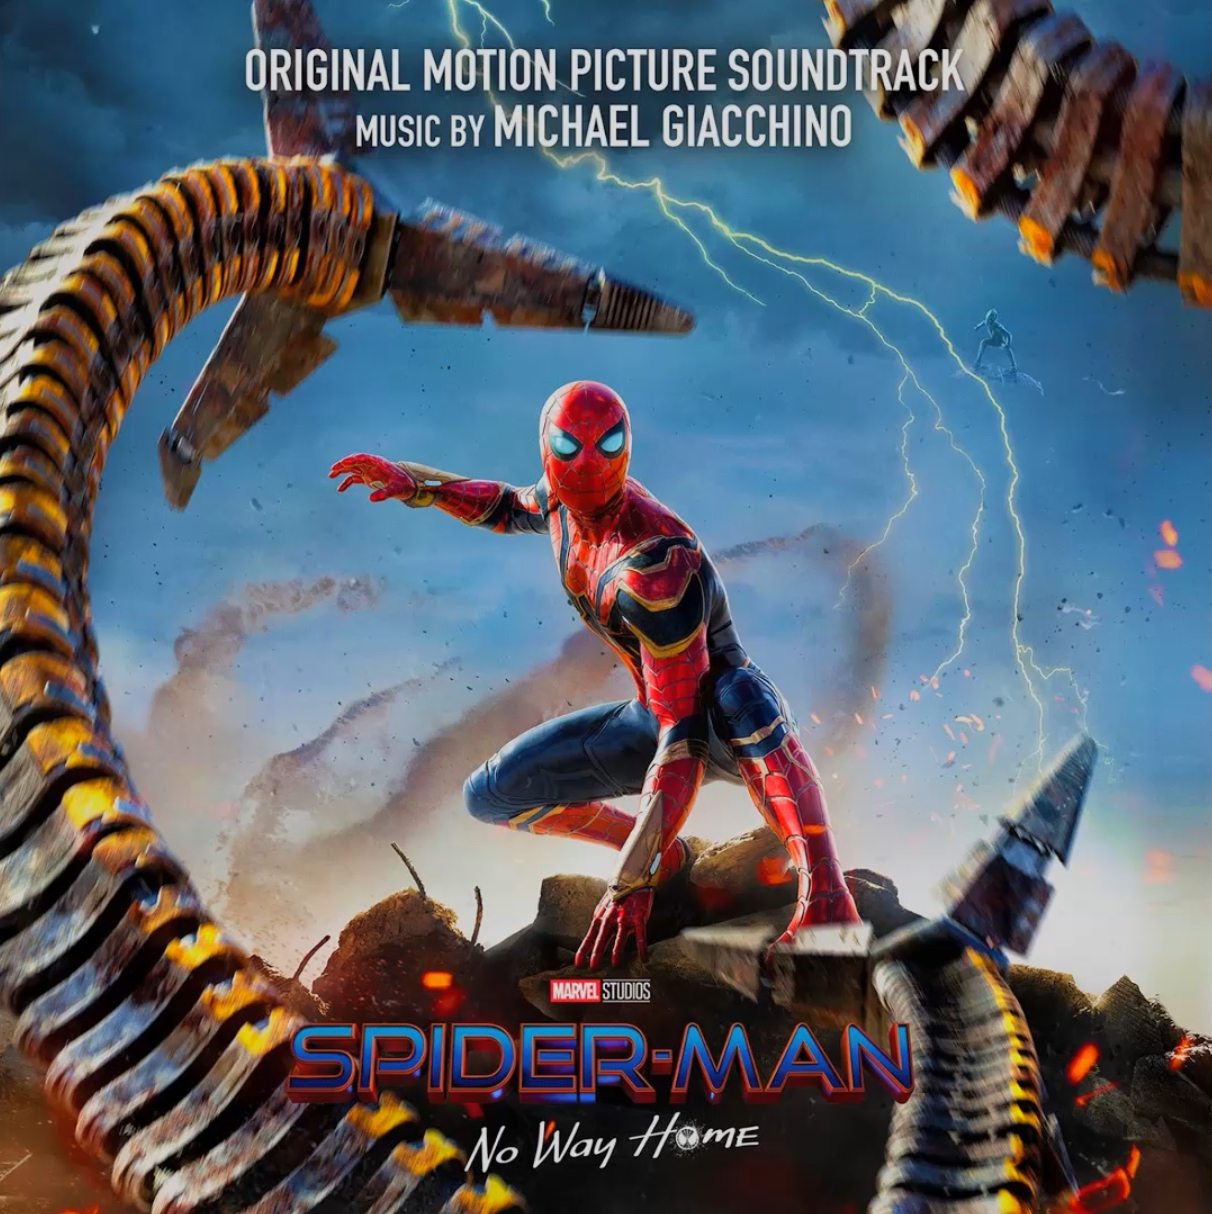 Michael Giacchino - Spider-Man: No Way Home 蜘蛛侠3:英雄无归 (Original Motion Picture Soundtrack) (2021) [iTunes Plus AAC M4A] + Hi-Res-新房子